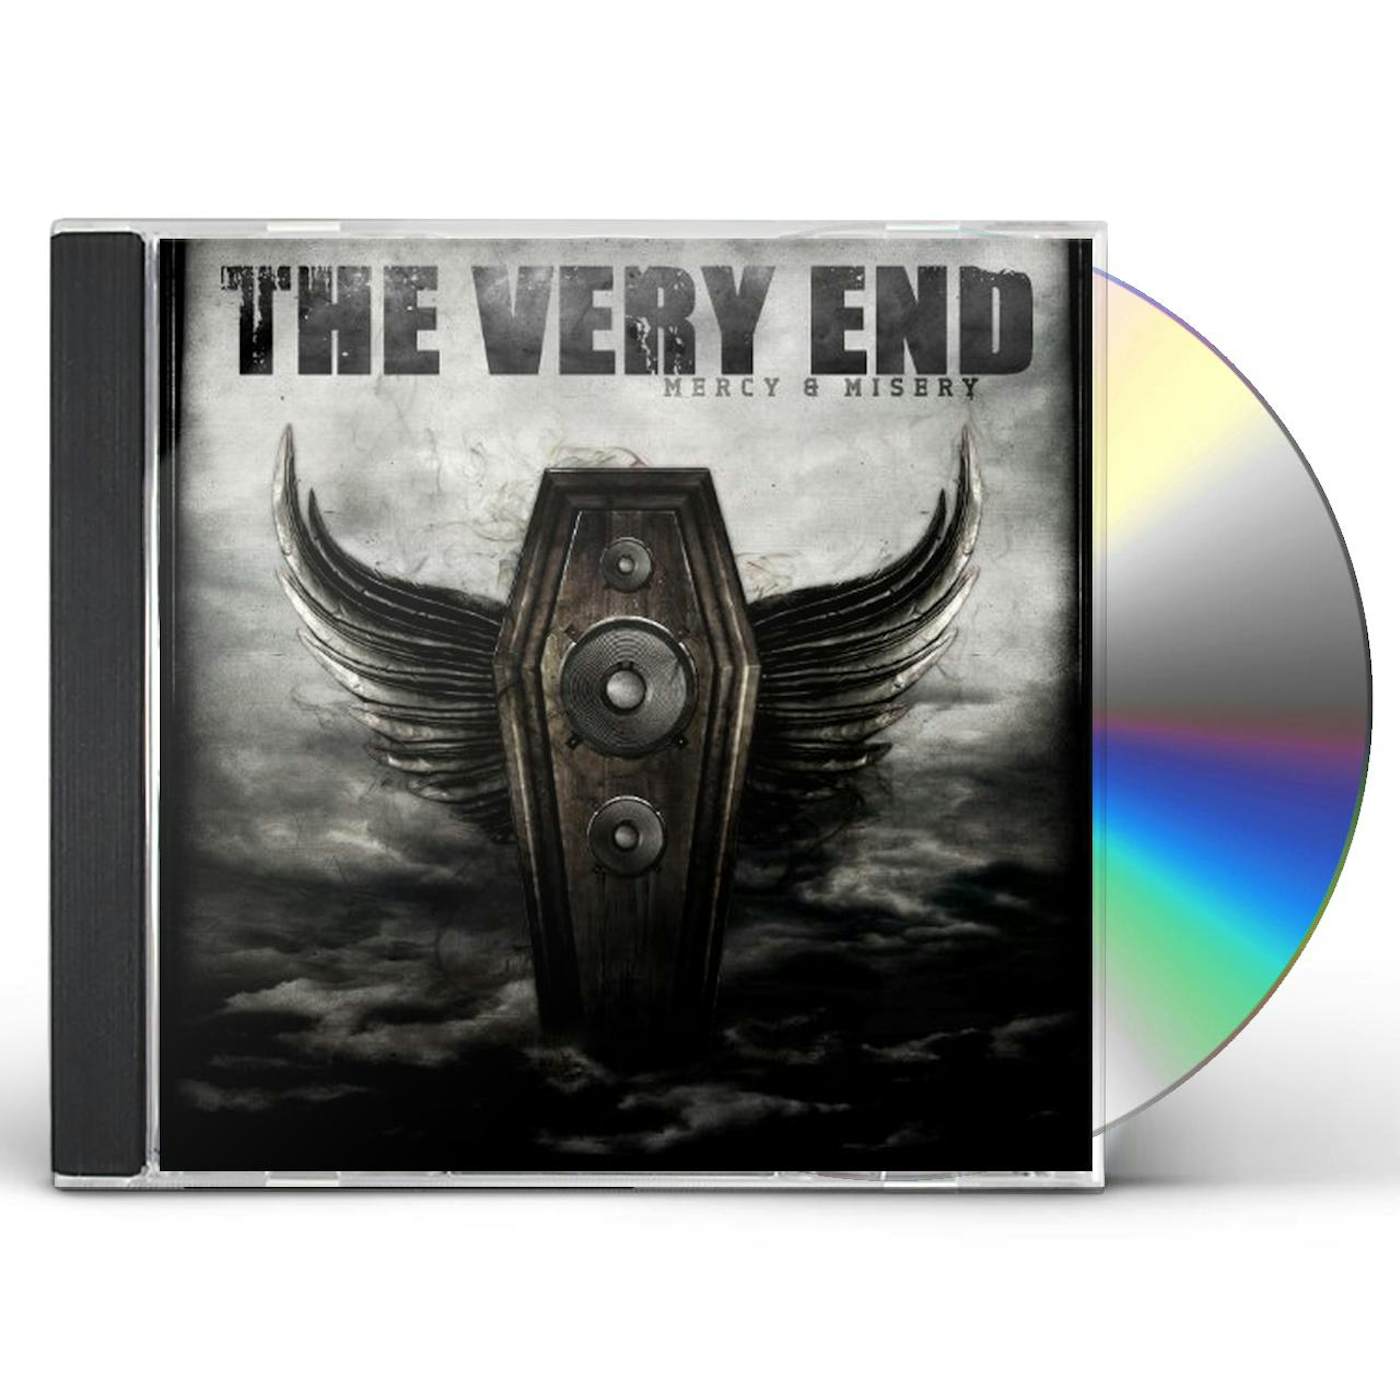 The Very End MERCY & MISERY CD